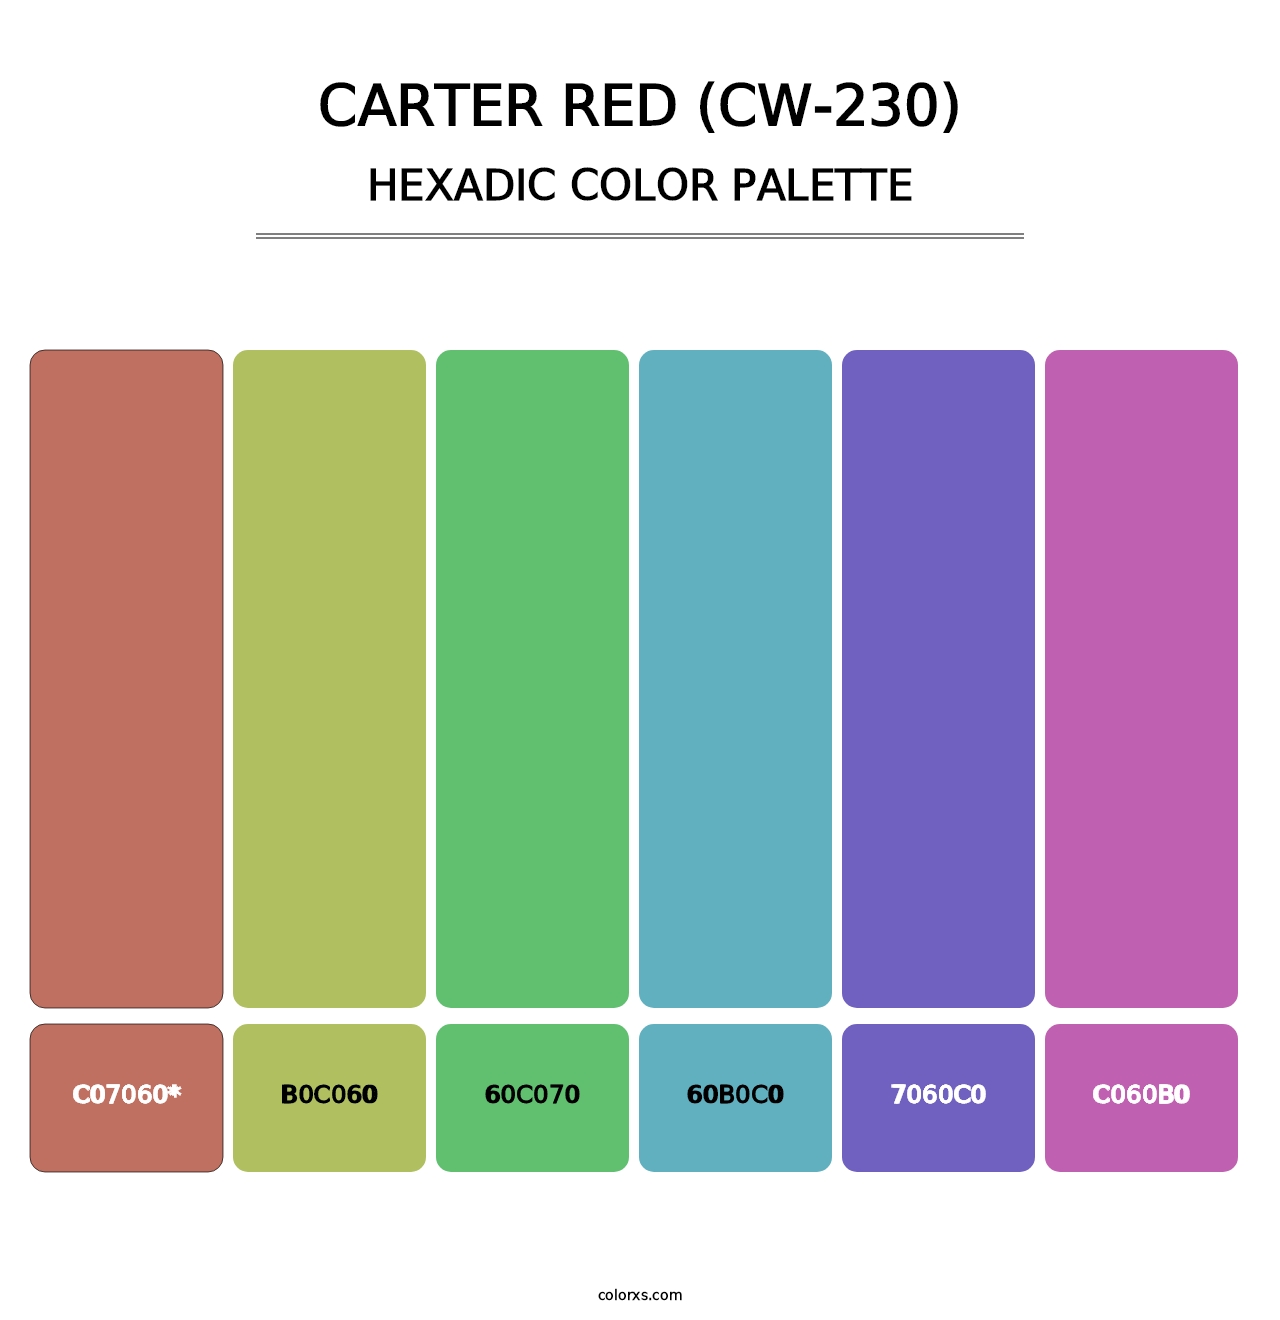 Carter Red (CW-230) - Hexadic Color Palette